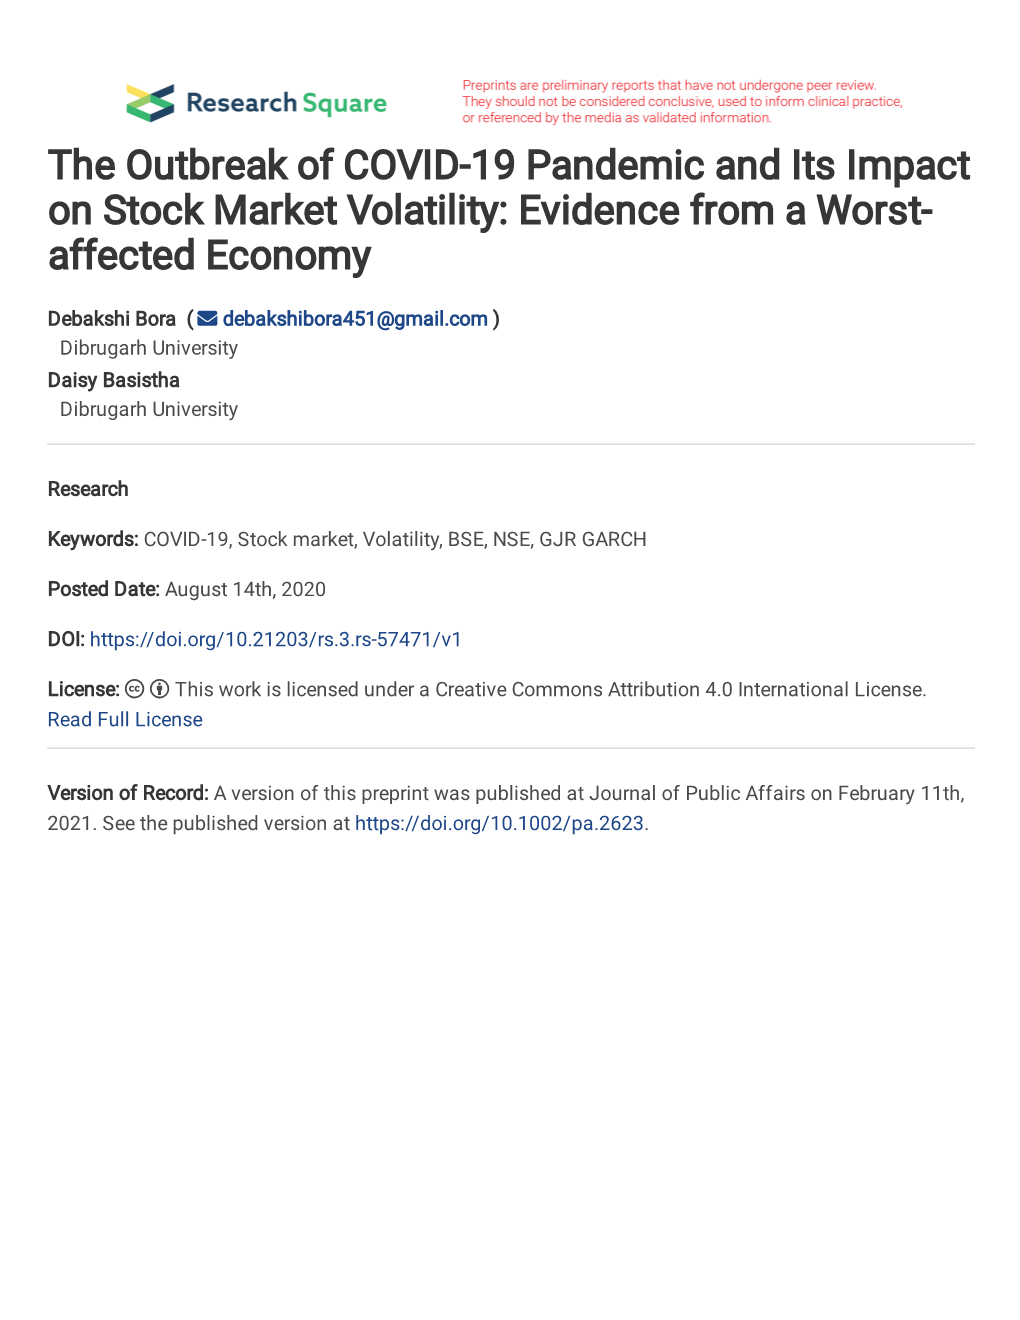 The Outbreak of COVID-19 Pandemic and Its Impact on Stock Market Volatility: Evidence from a Worst- Affected Economy